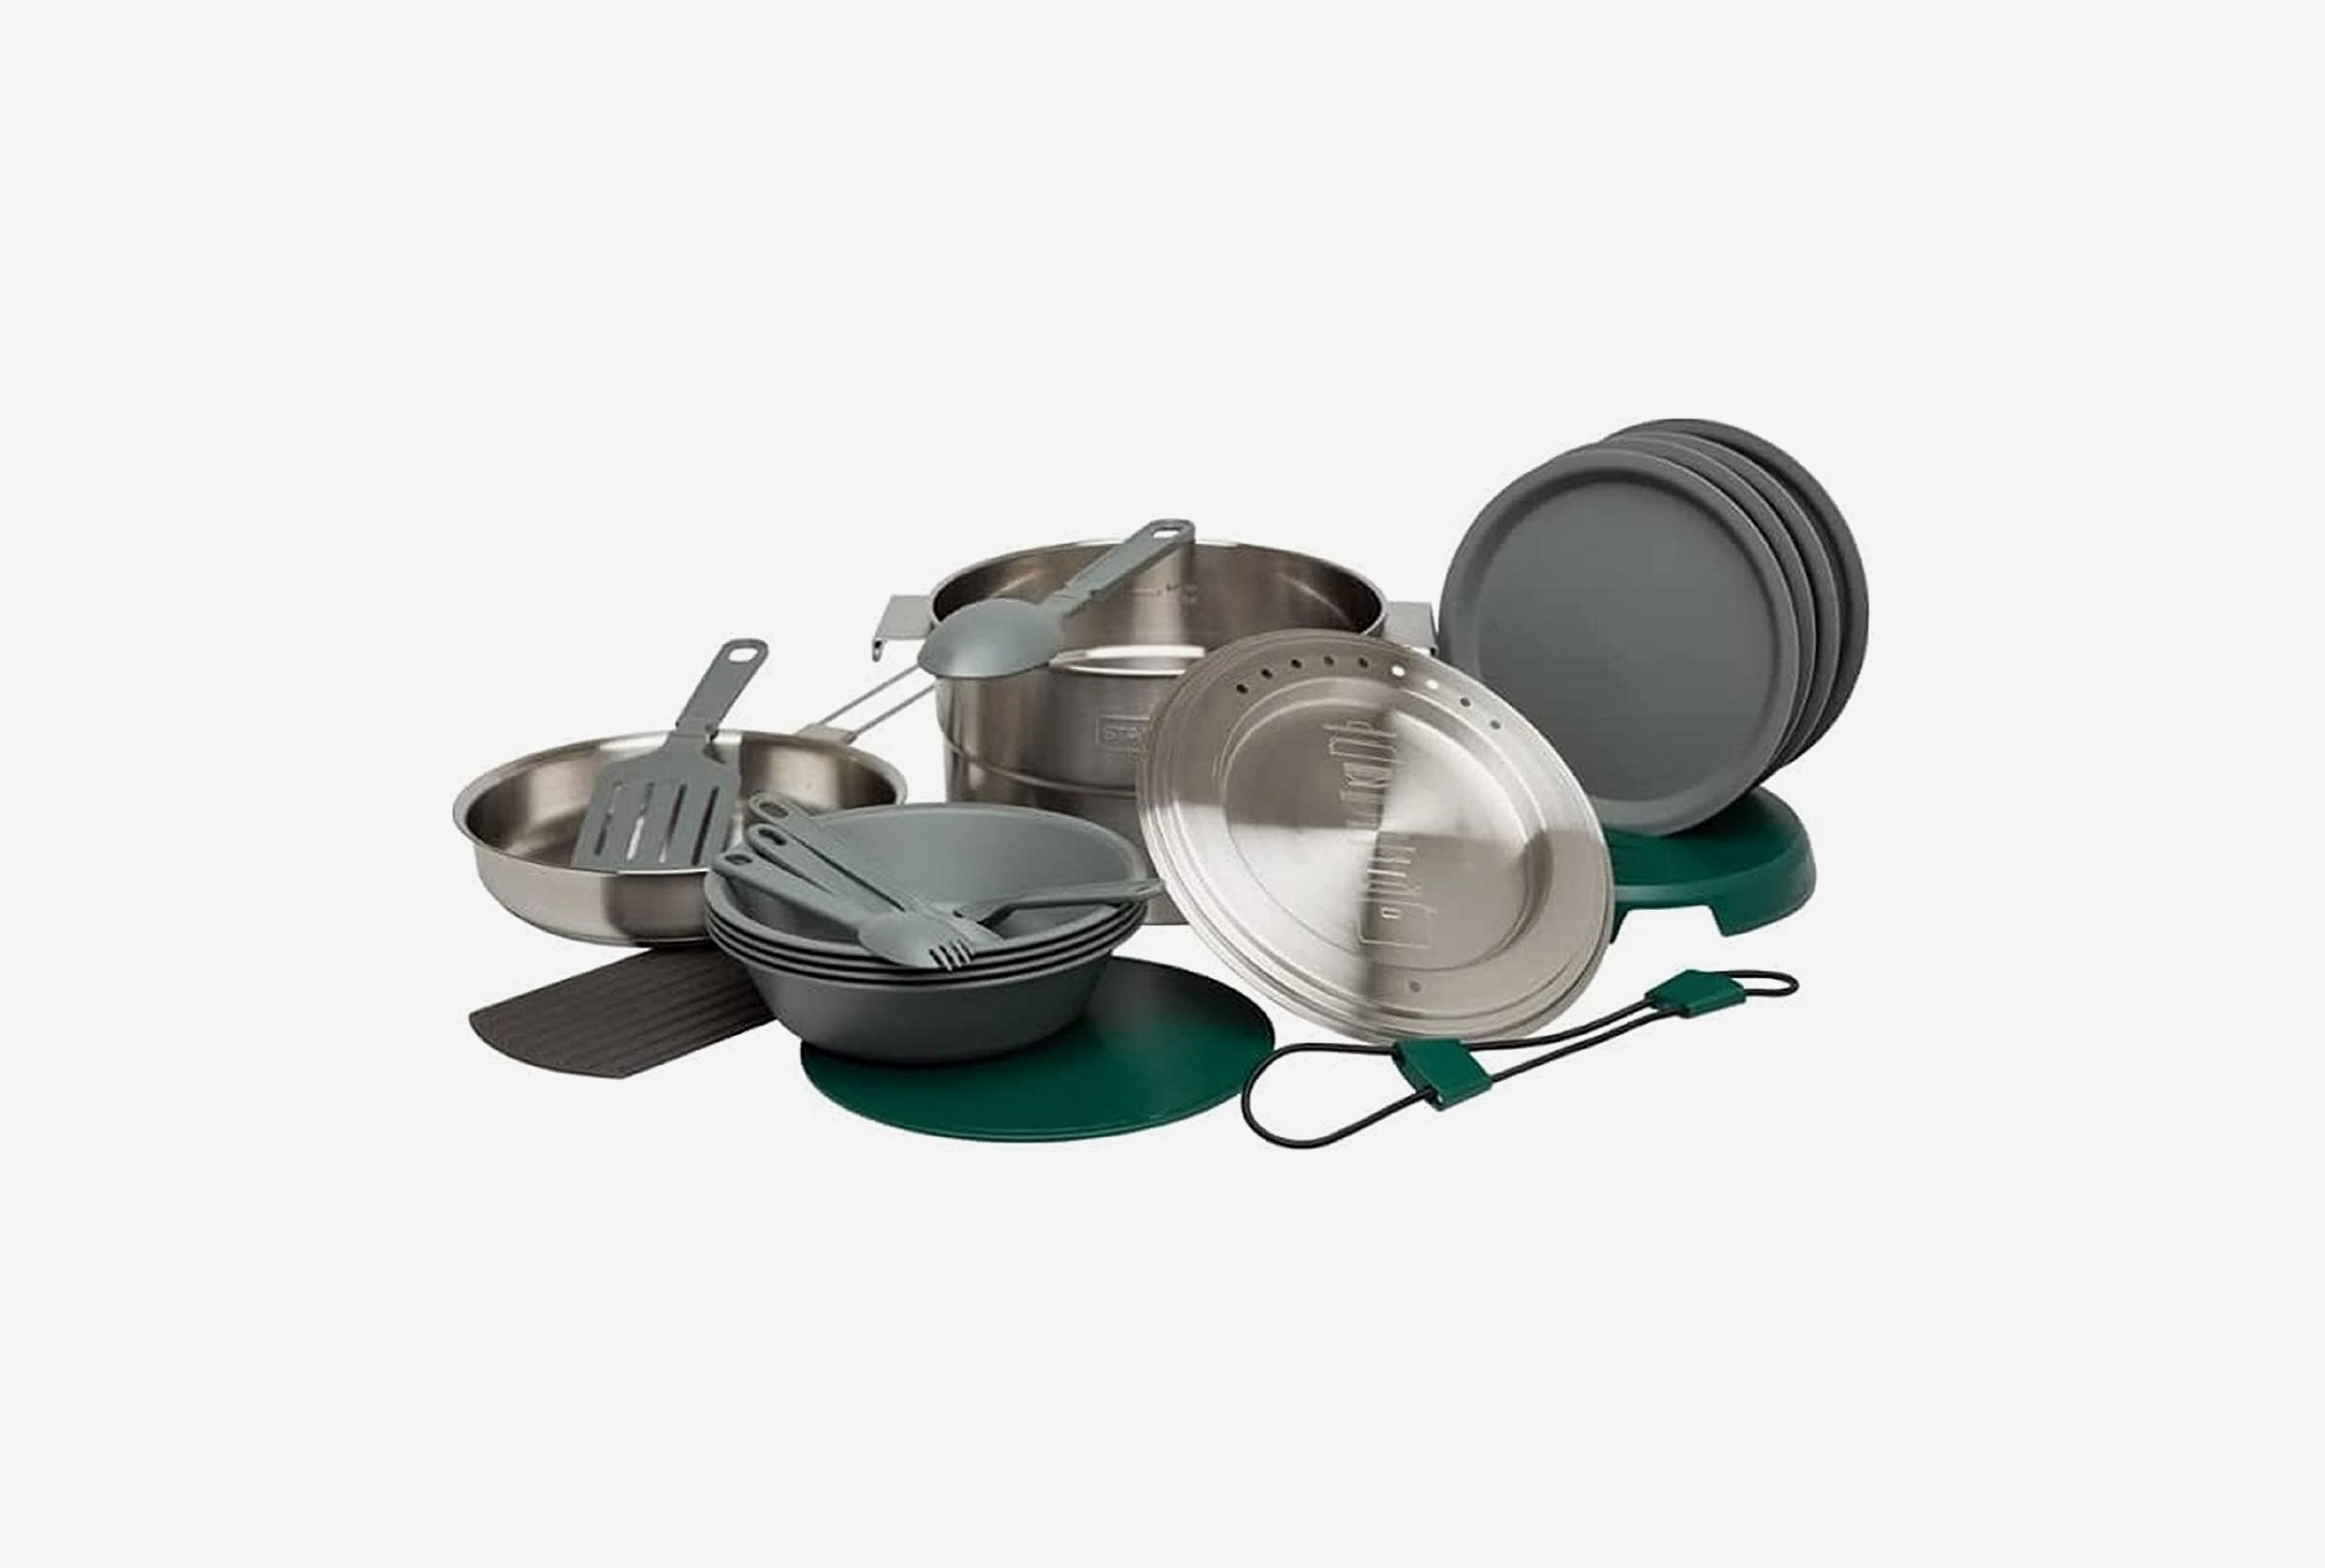 This Popular Stanley Camp Cook Set Is Just $29 Right Now